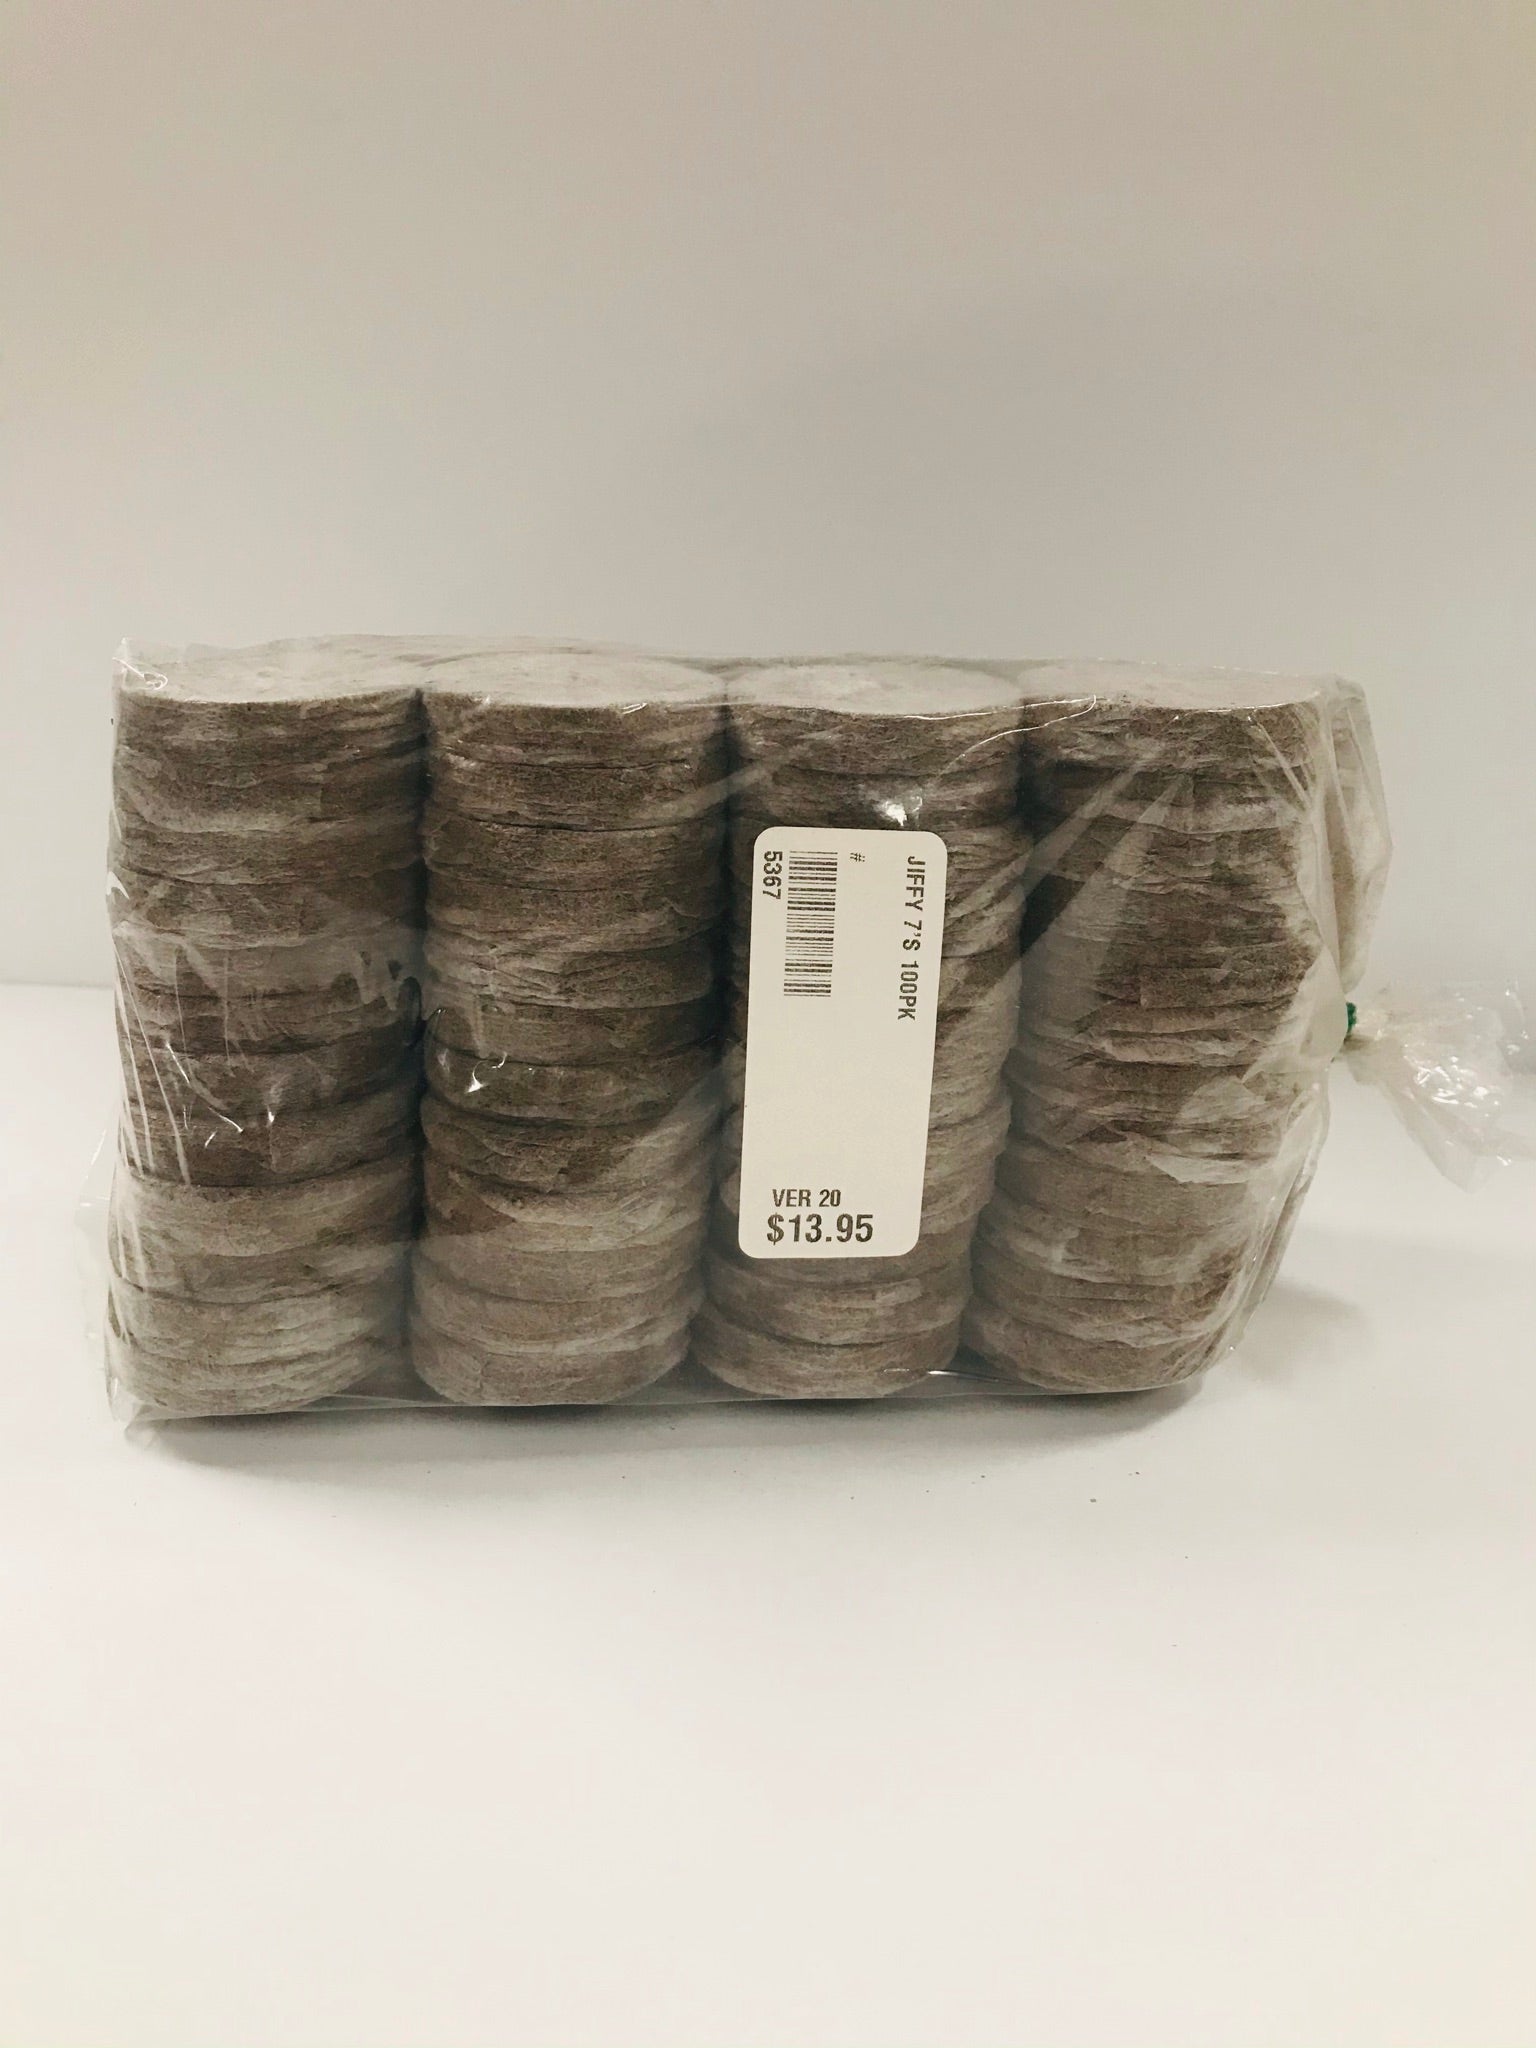 Jiffy 7's Peat/ Coir Mix Pellets - Package of 100